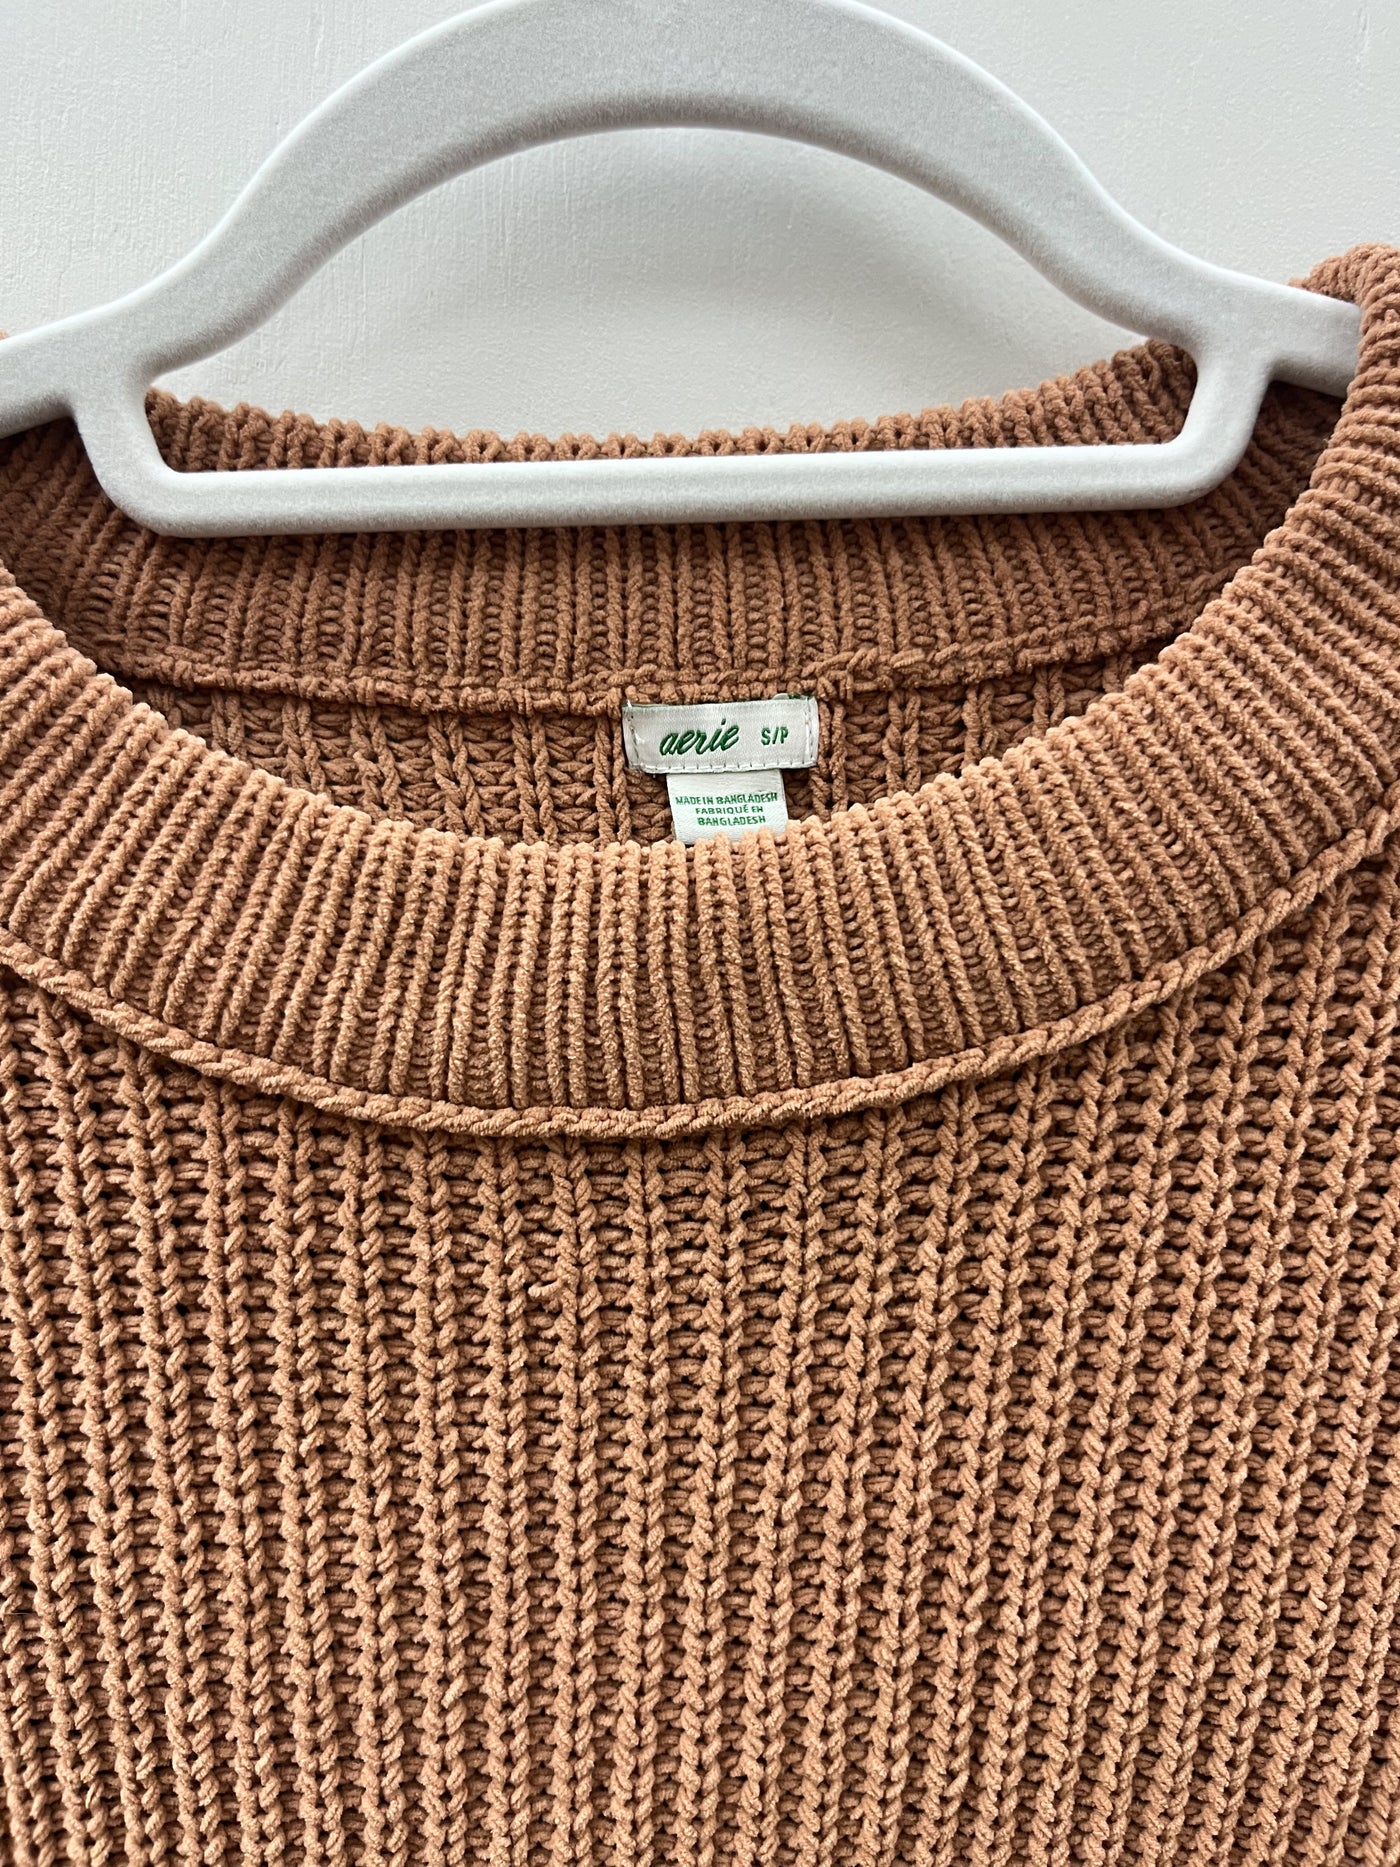 Aerie brown sweater